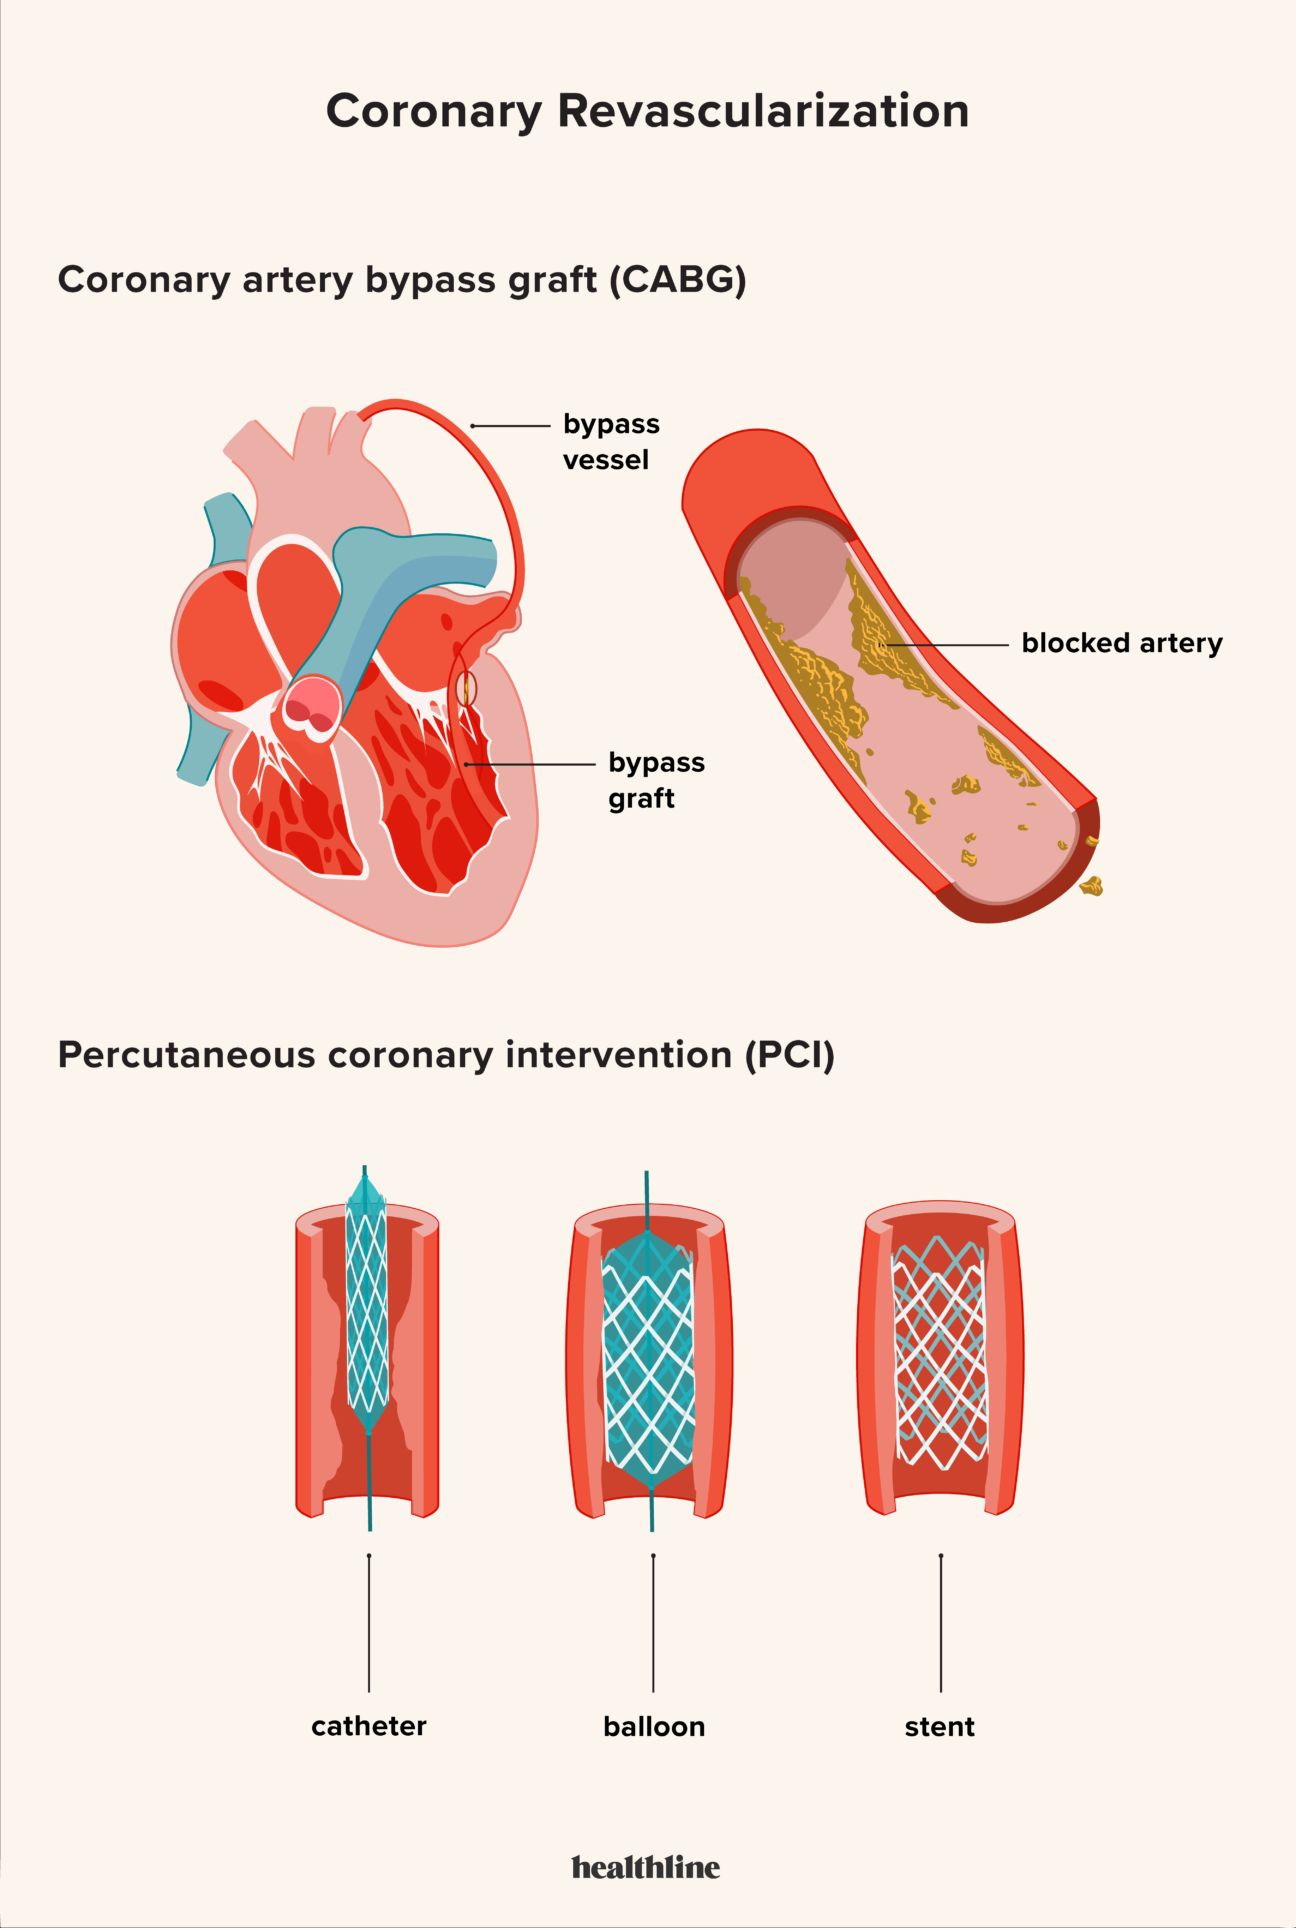 coronary artery bypass graft creating an alternate route for blood flow and percutaneous coronary intervention widening the arterial space